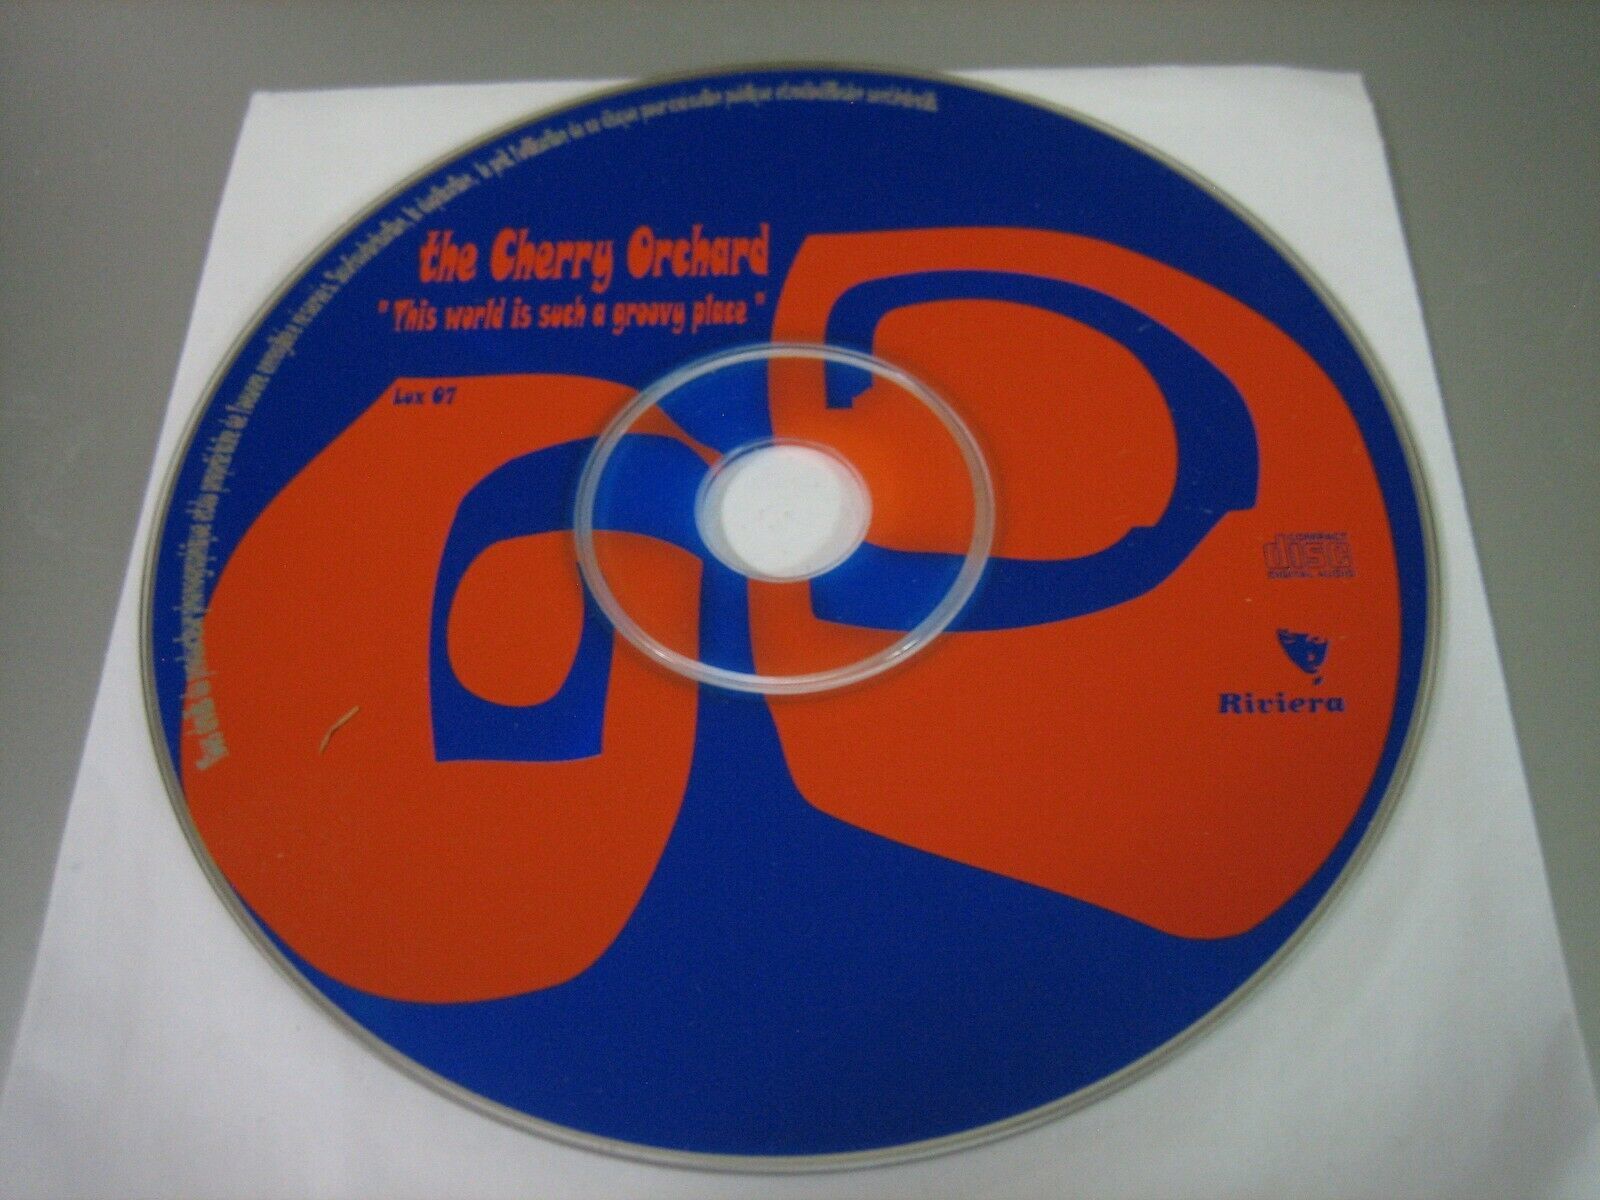 Primary image for This World Is Such A Groovy Place by The Cherry Orchard (CD, 1999) - Disc Only!!